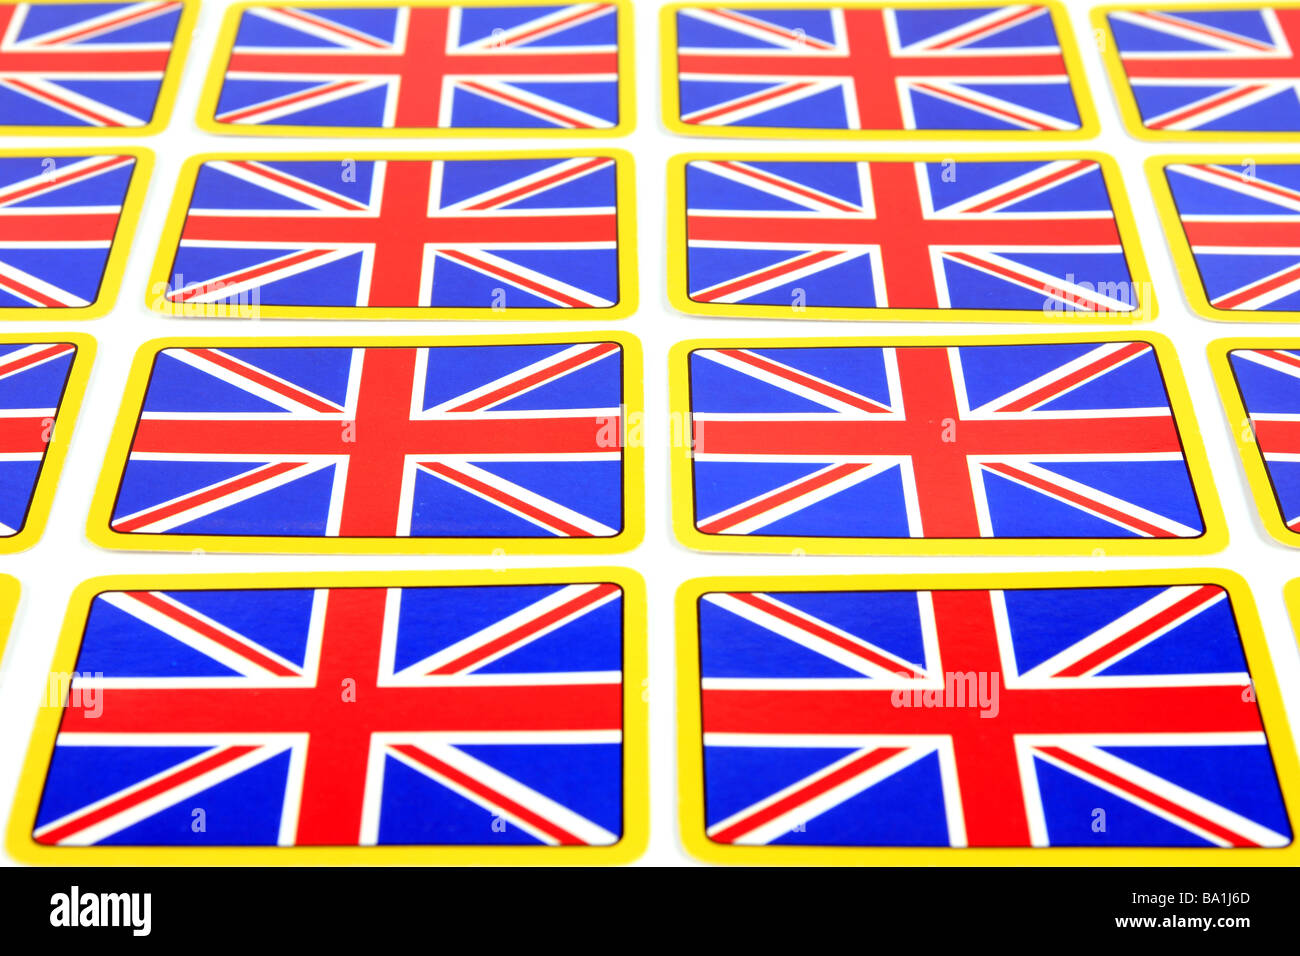 Playing cards with the British Union Jack flag on the back Stock Photo